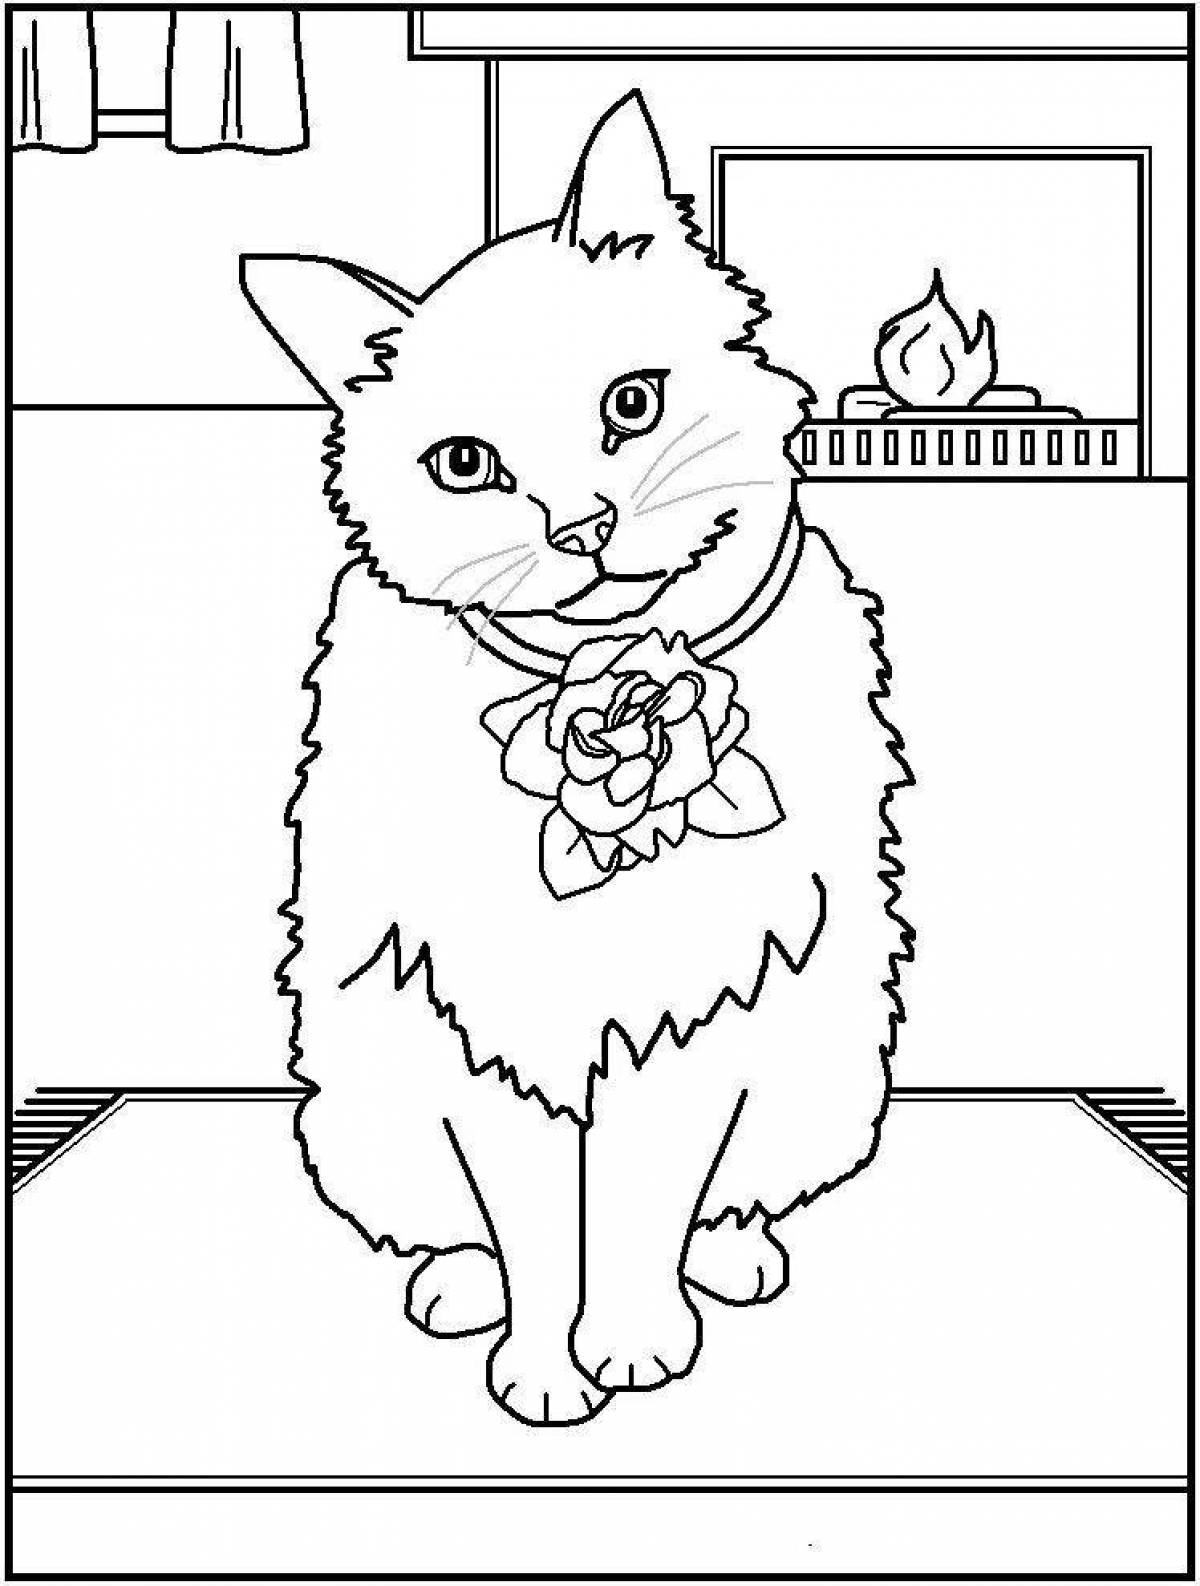 Coloring page elegant queen of cats